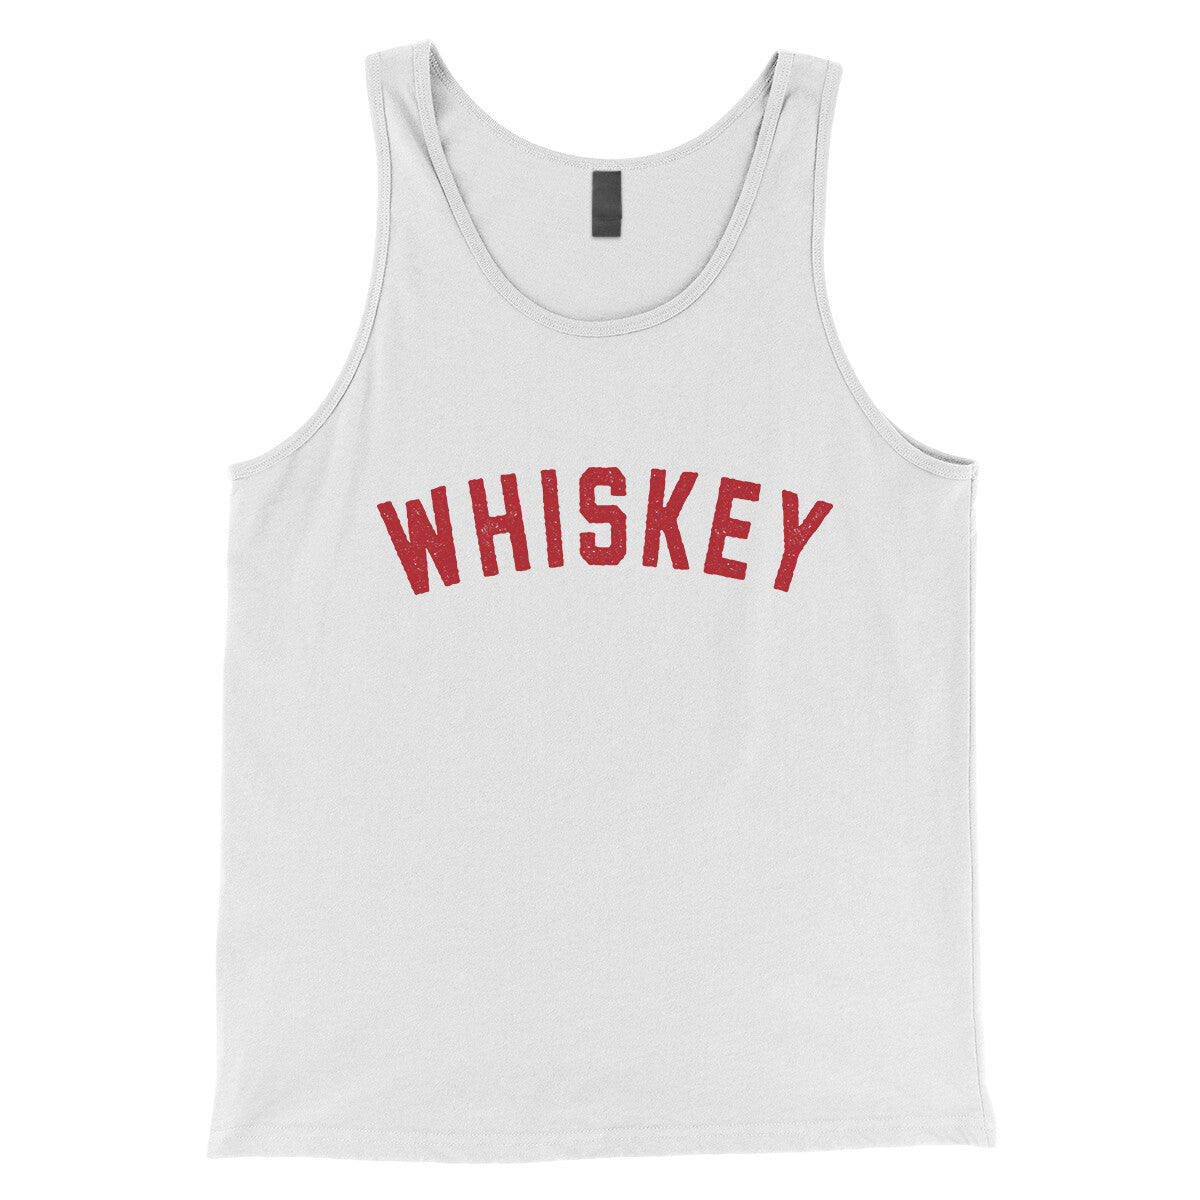 Whiskey in White Color